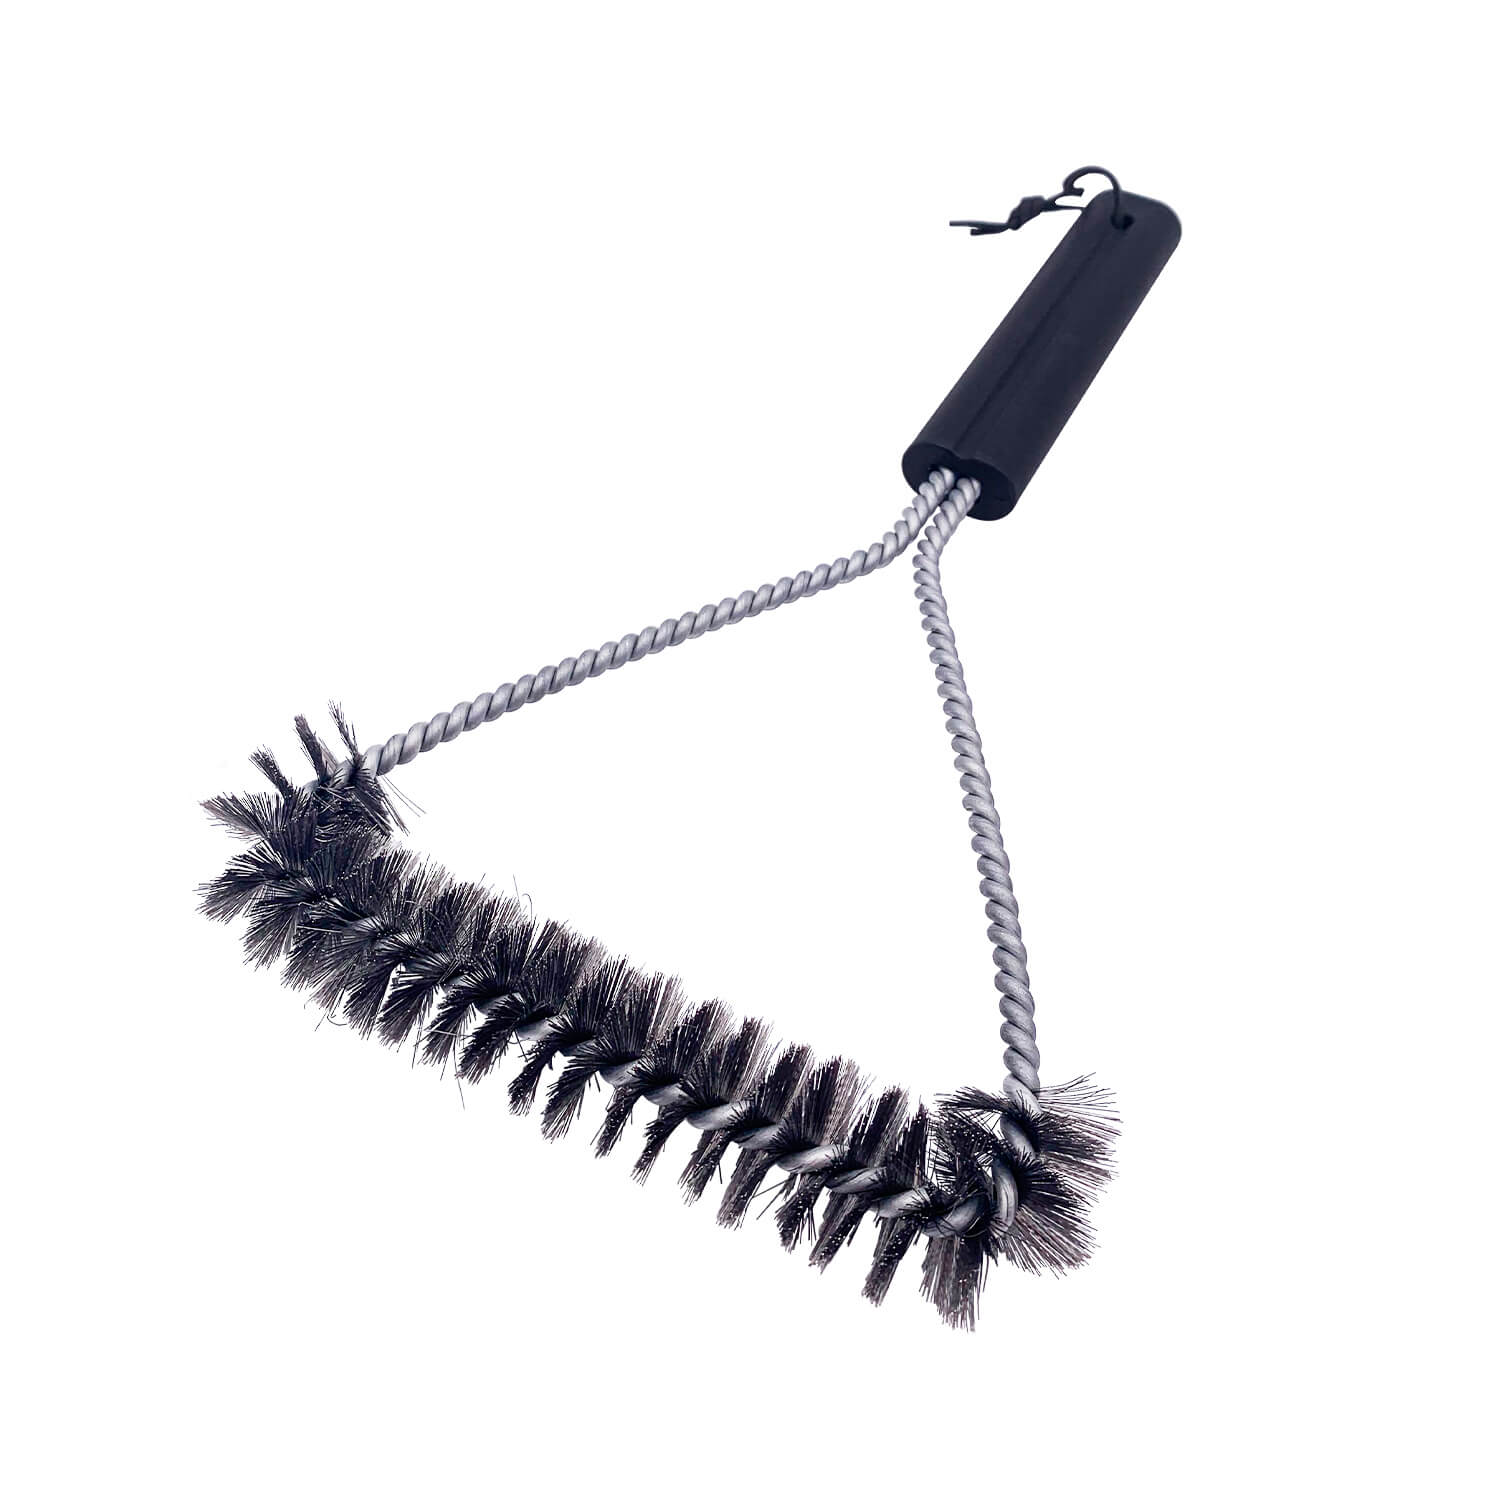 Stainless Steel Sided Grill Brush, Heavy Duty Grill Accessories -YAOAWE 